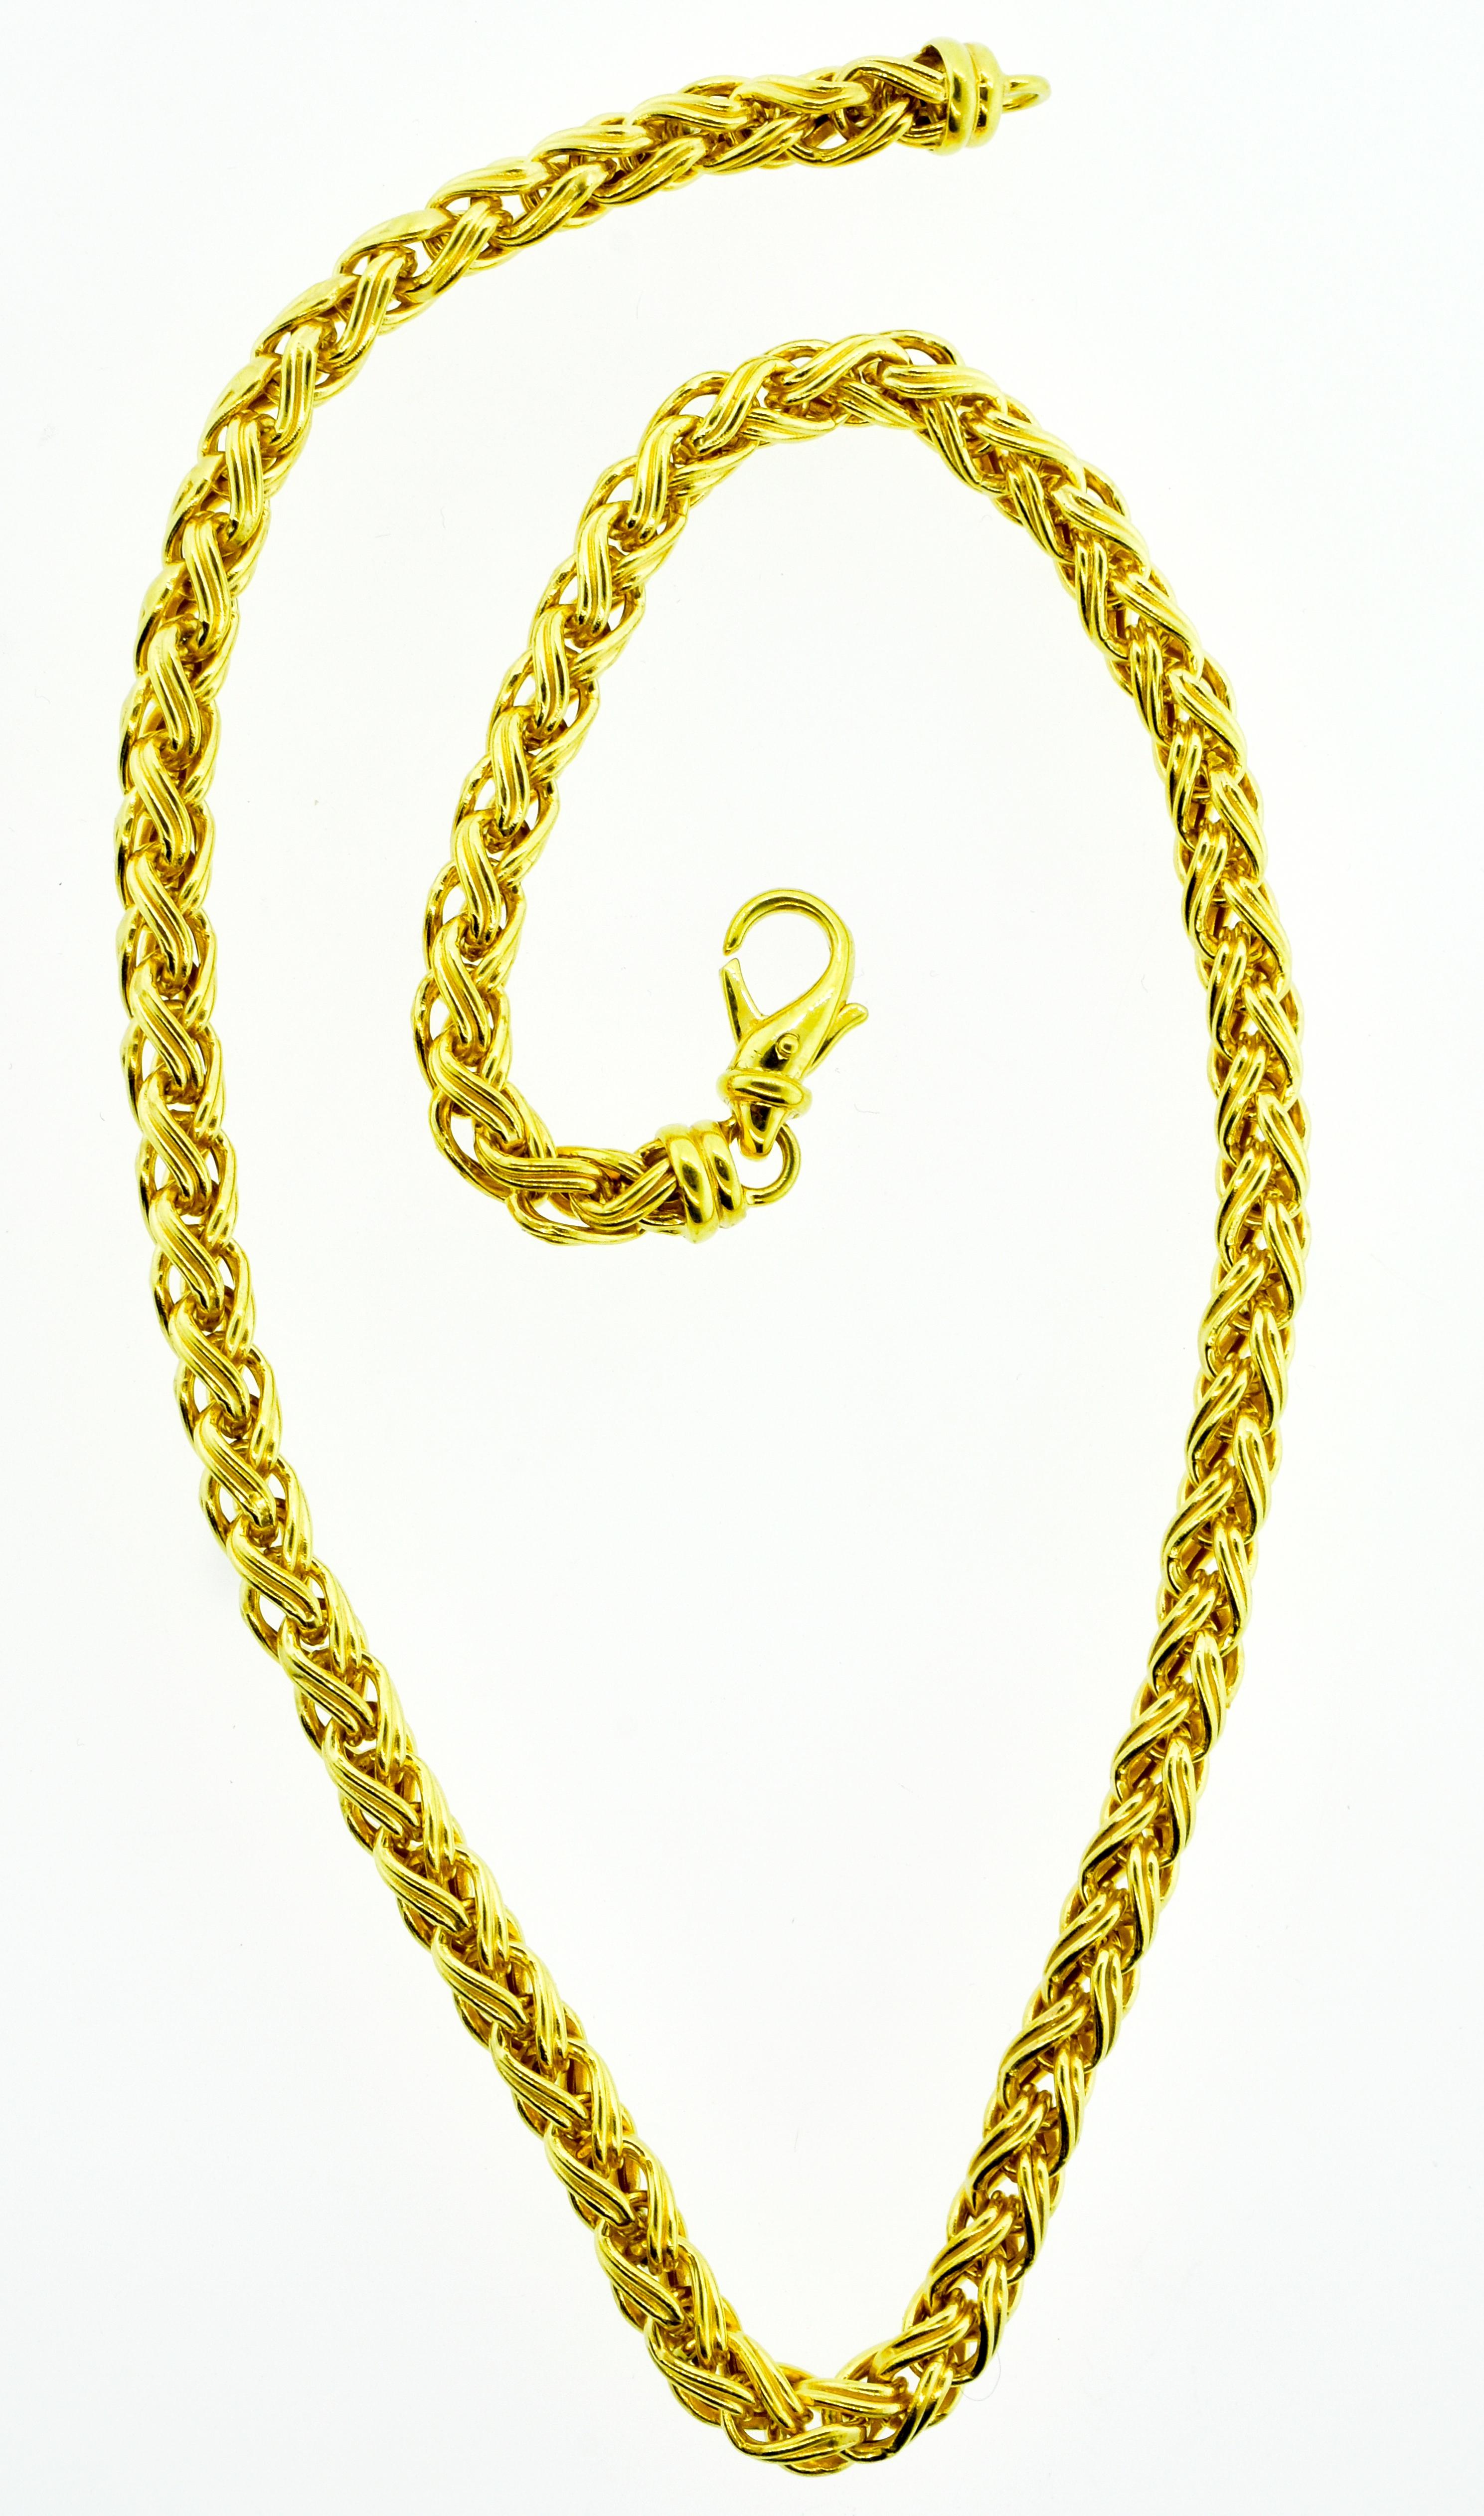 Gold Chain necklace with an unusual fine woven design.  17 inches long with a secure clasp, this necklace can worn alone or suspending a lovely companion pendant.  Contemporary and in fine condition and weighing 27.74 grams, this necklace makes a